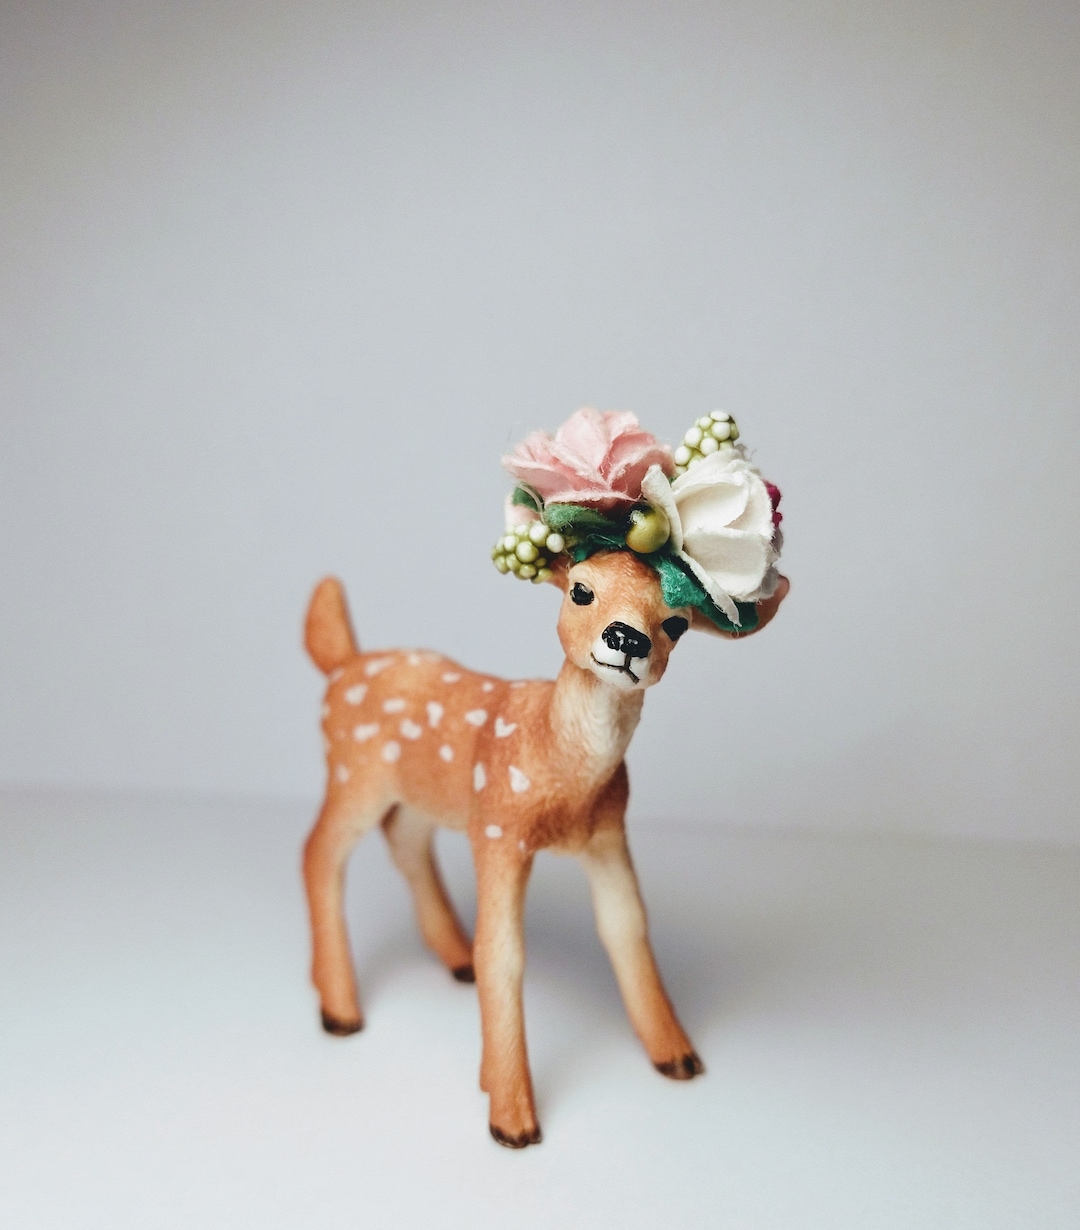 Schleich fawn animal cake topper, floral crown, birthday cake decoration.